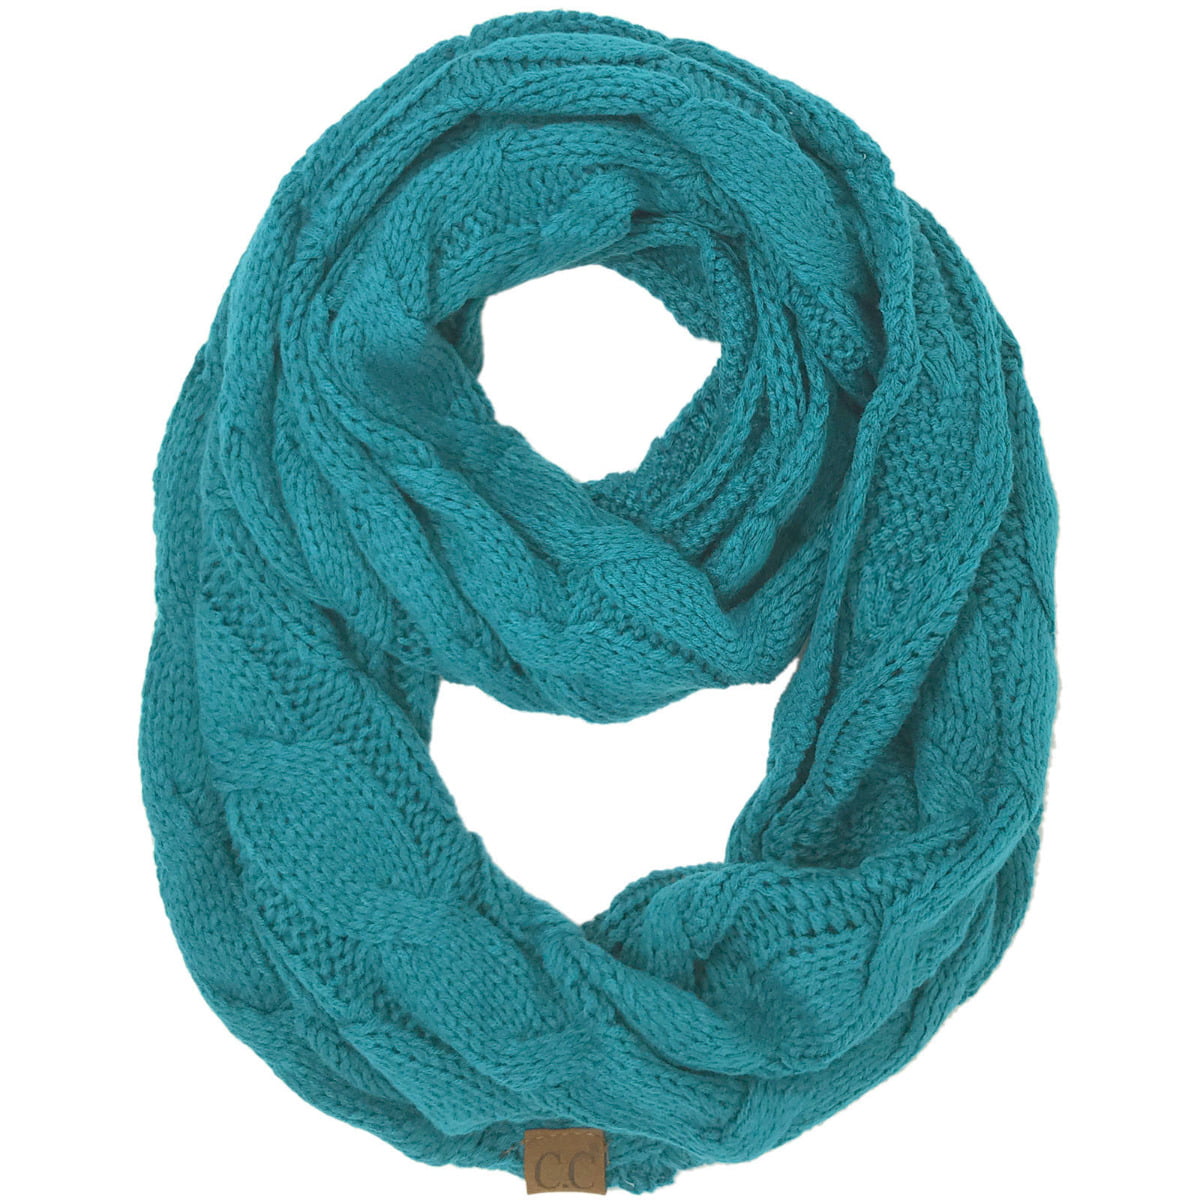 Share Maison Winter Thick Infinity Scarf for Women Warm Knit Cashmere Wool Scarf Circle Loop Scarf Men Unisex 